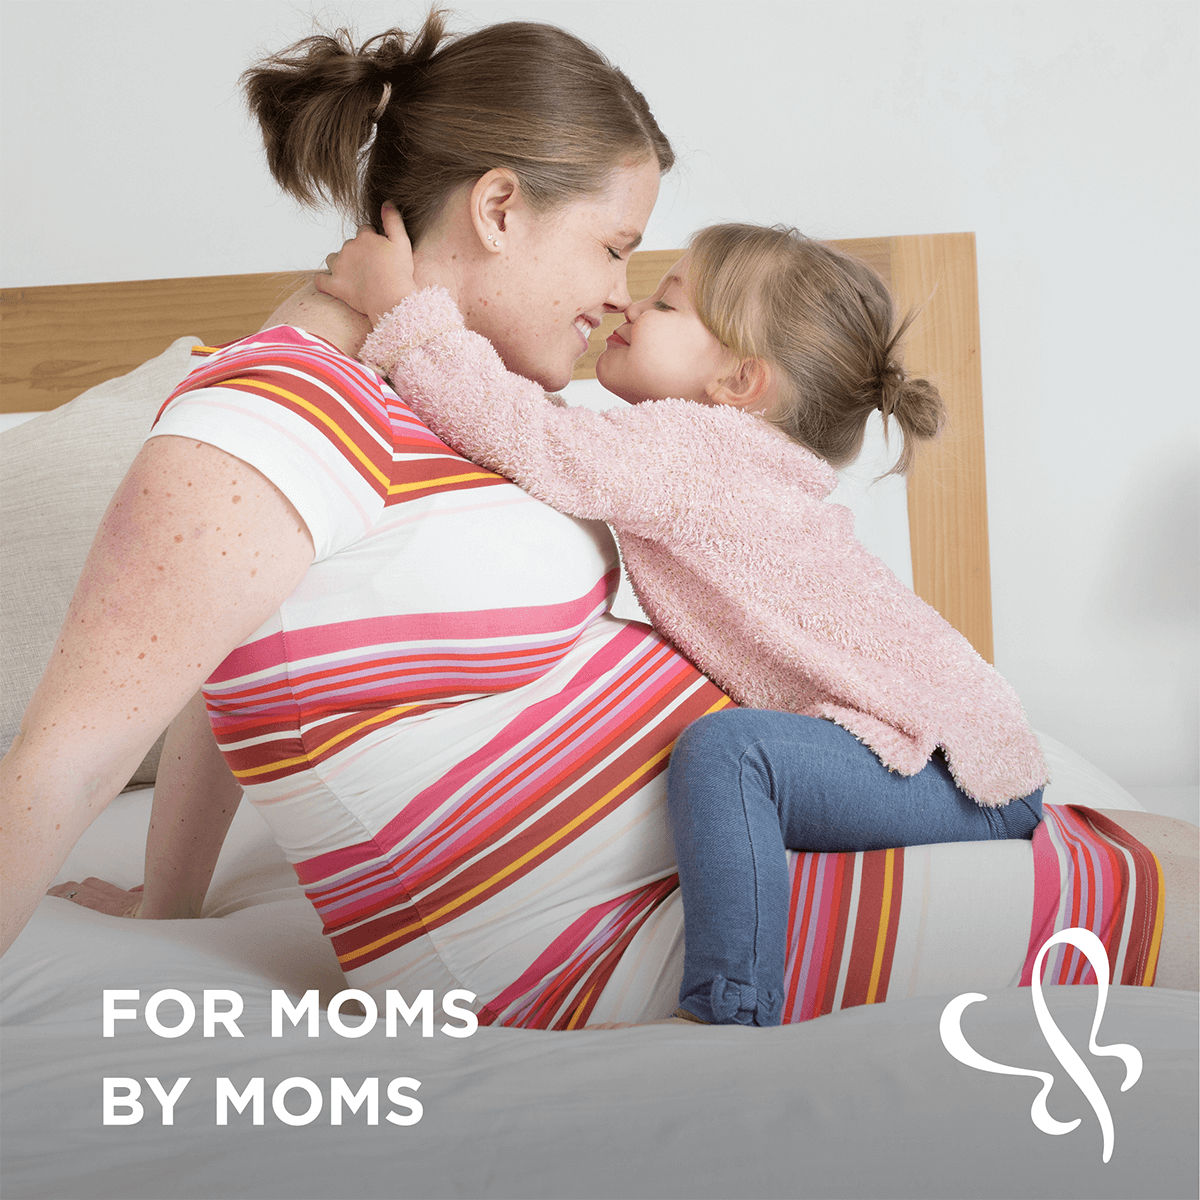 Lactation Support + Probiotics – Mommy's Bliss